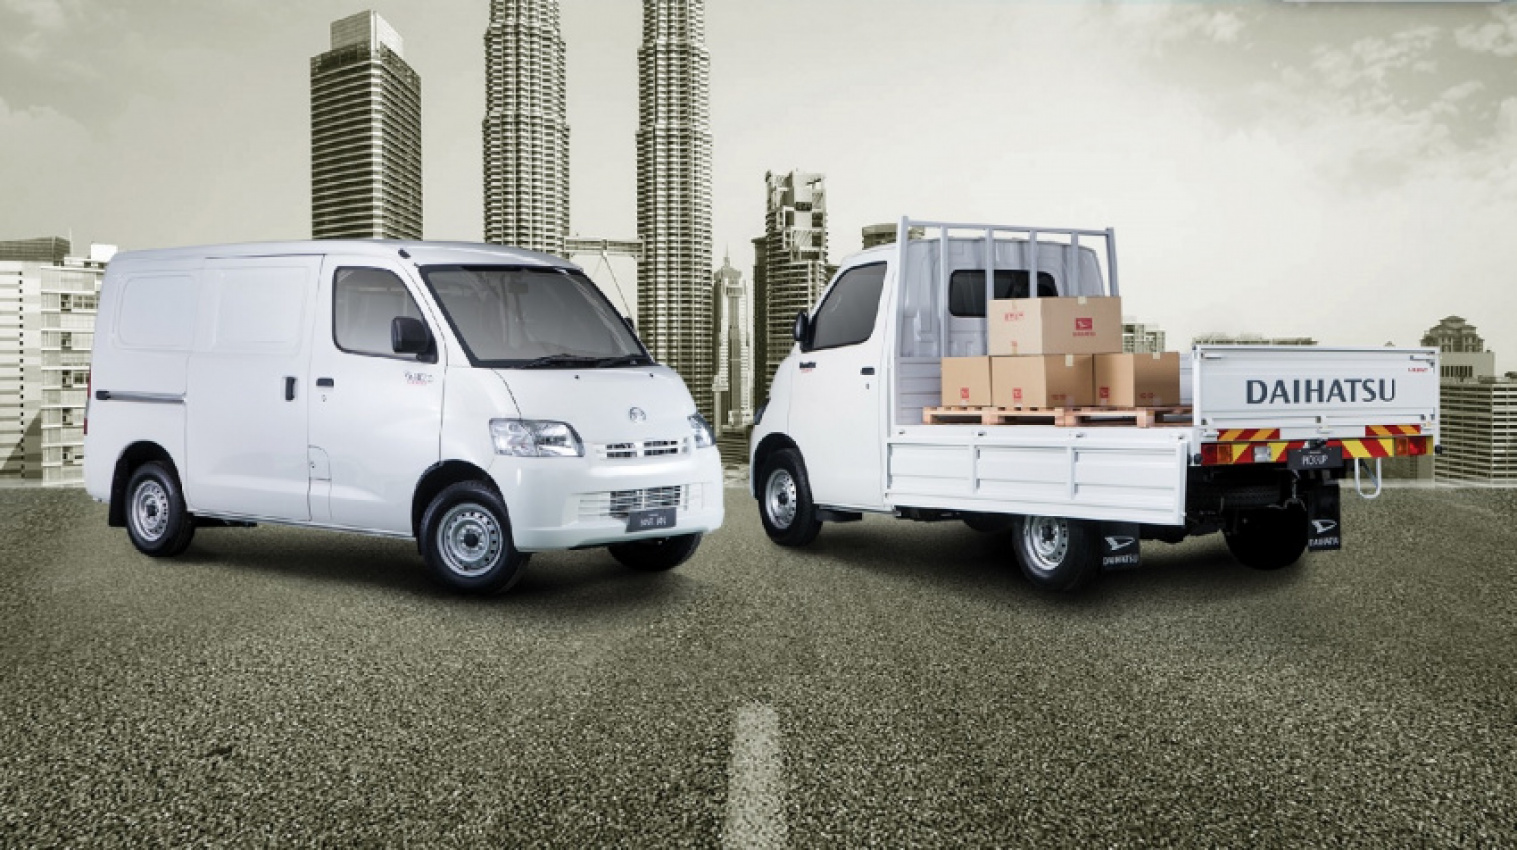 autos, cars, commercial vehicles, daihatsu, automotive, commercial vehicles, daihatsu malaysia sdn bhd, malaysia, panel van, pick-up, daihatsu gran max is number one pick-up and panel van model in malaysia